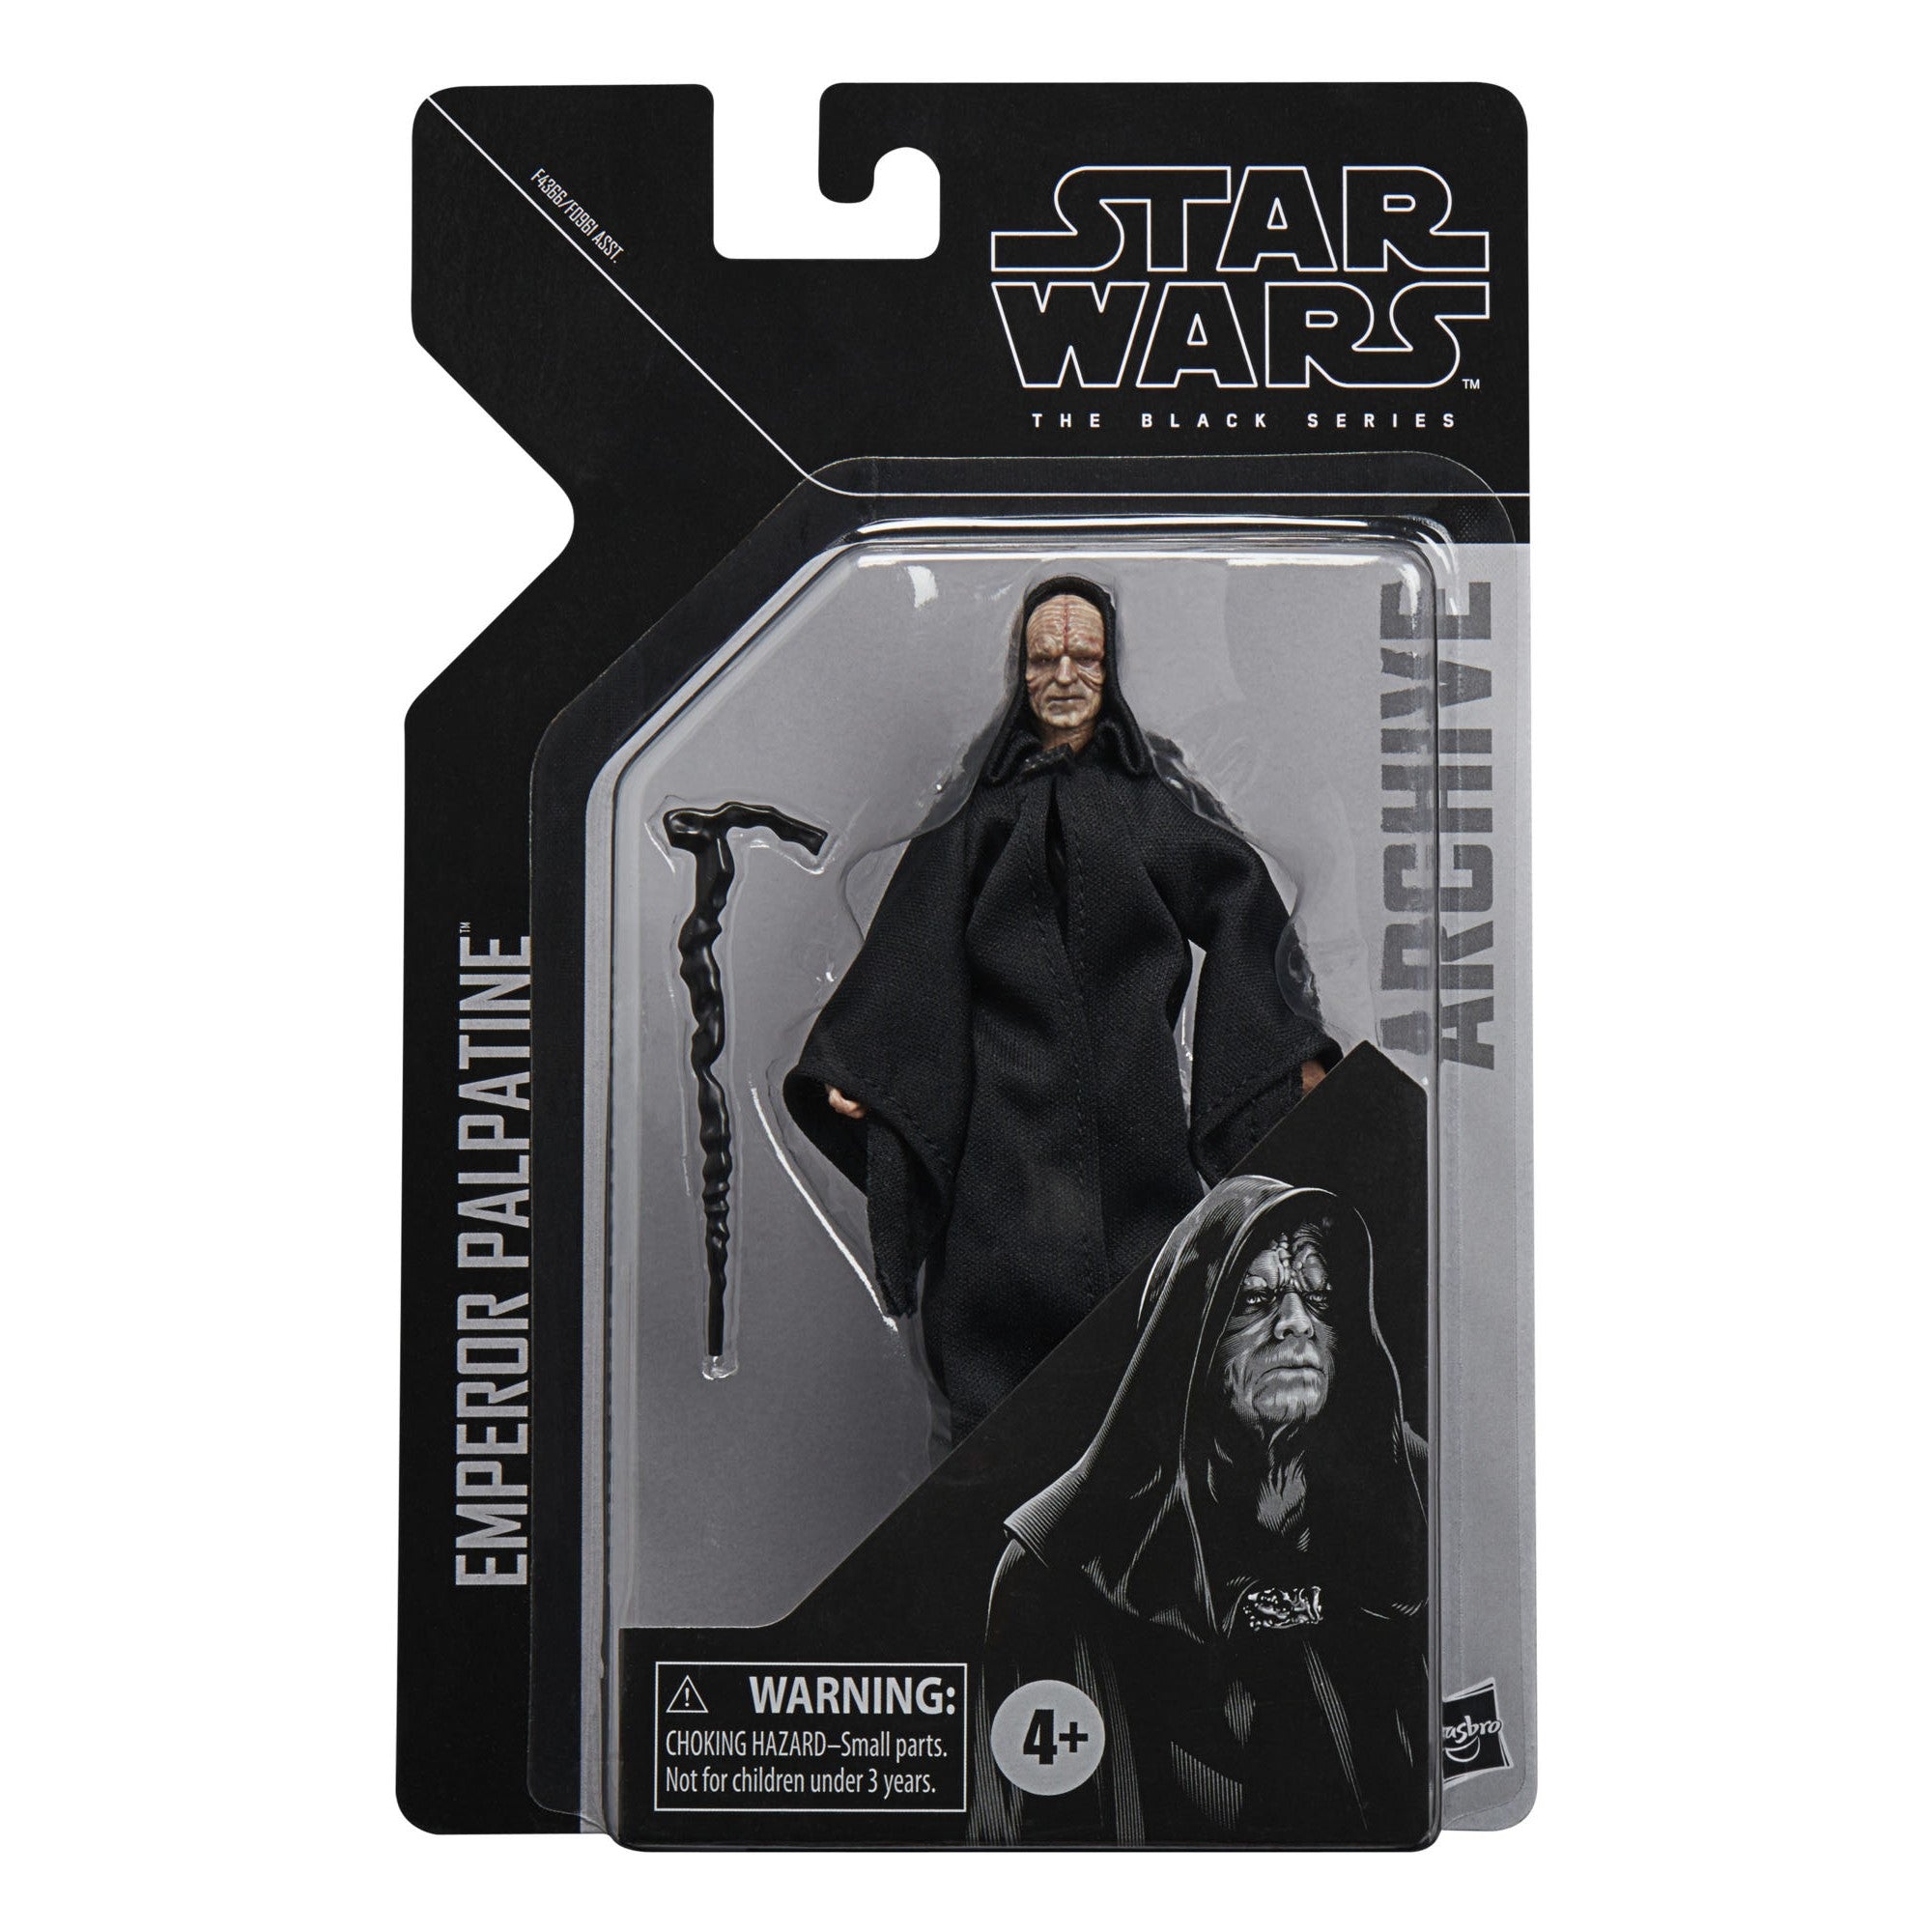 Star Wars Black Series 6" Archive Collection Emperor Palpatine